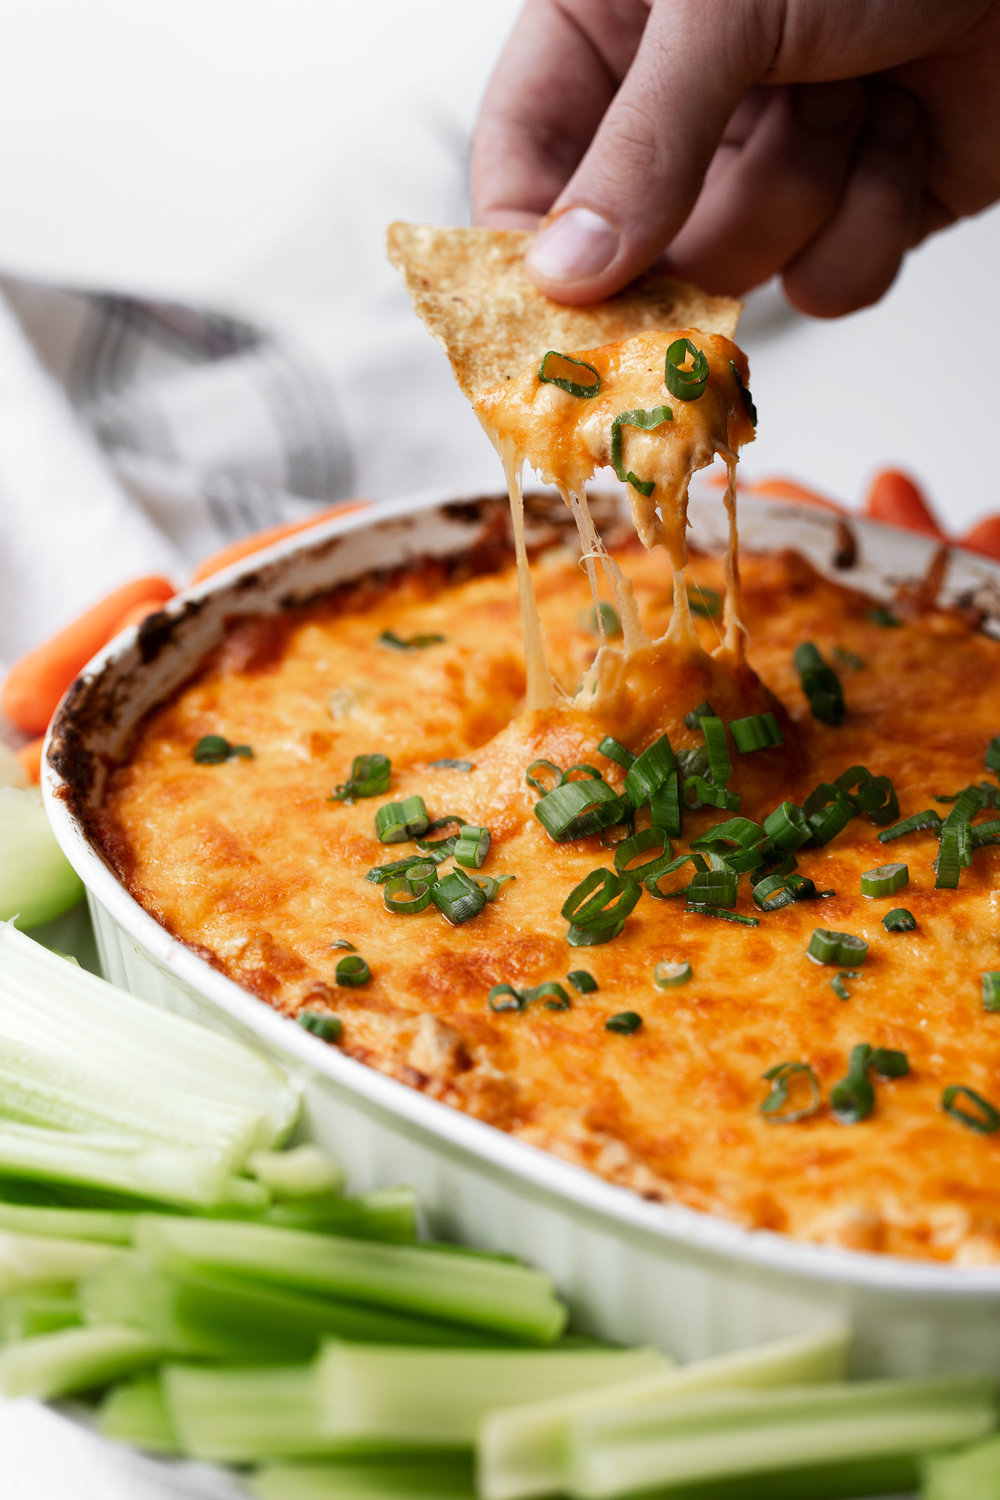 buffalo chicken dip recipe closeup with tortilla chip partly in the dip and a hand pulling it showing a cheese pull